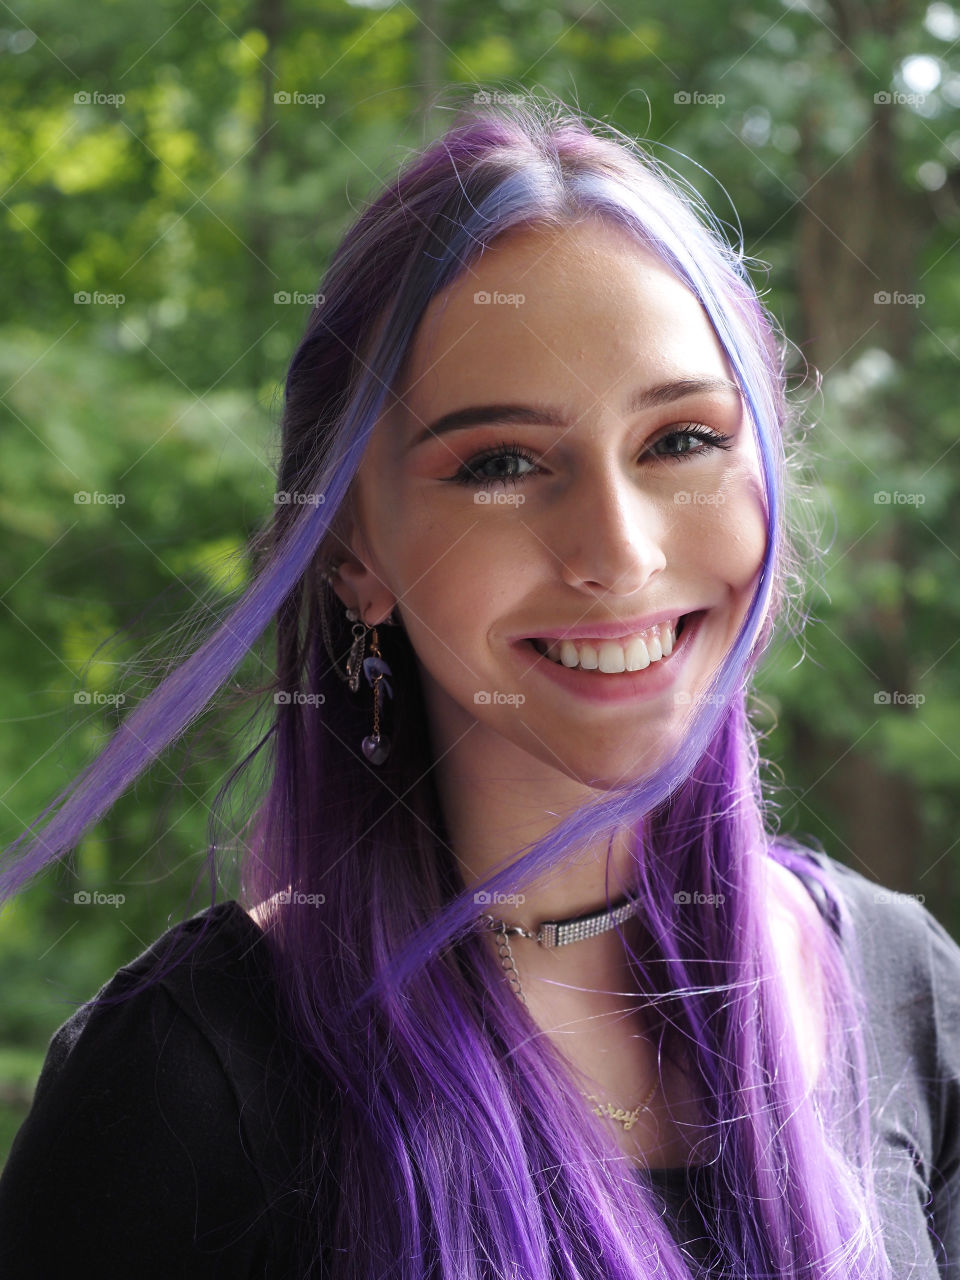 My daughter, beautiful smile, pretty young woman outdoors purple hair